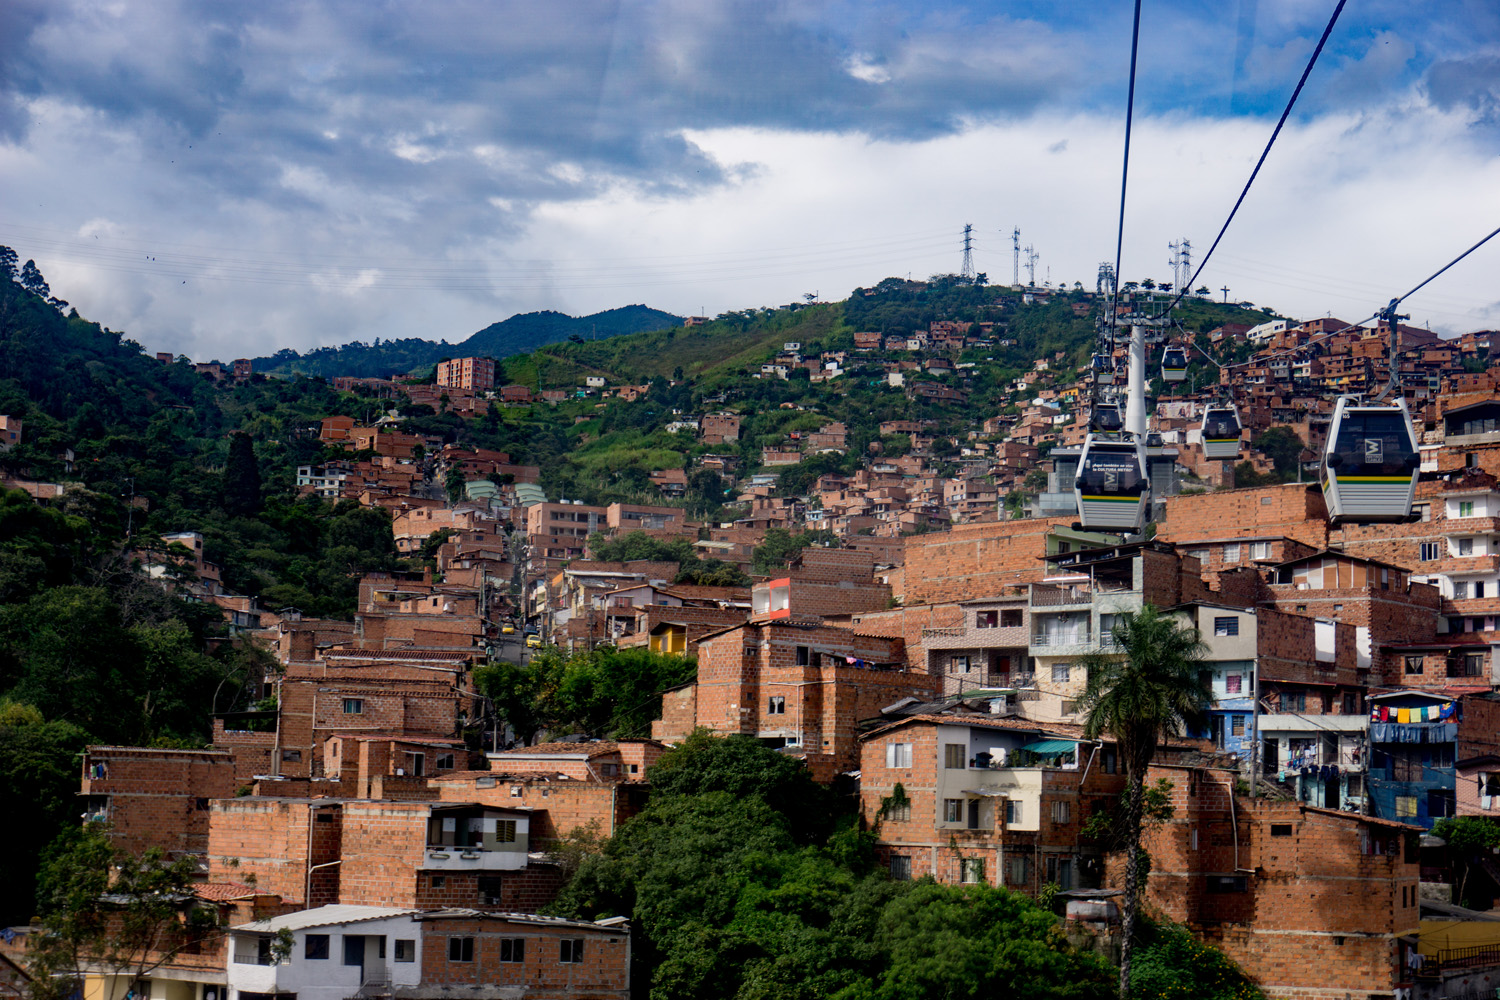 Medellín’s cable car system for daily transit.